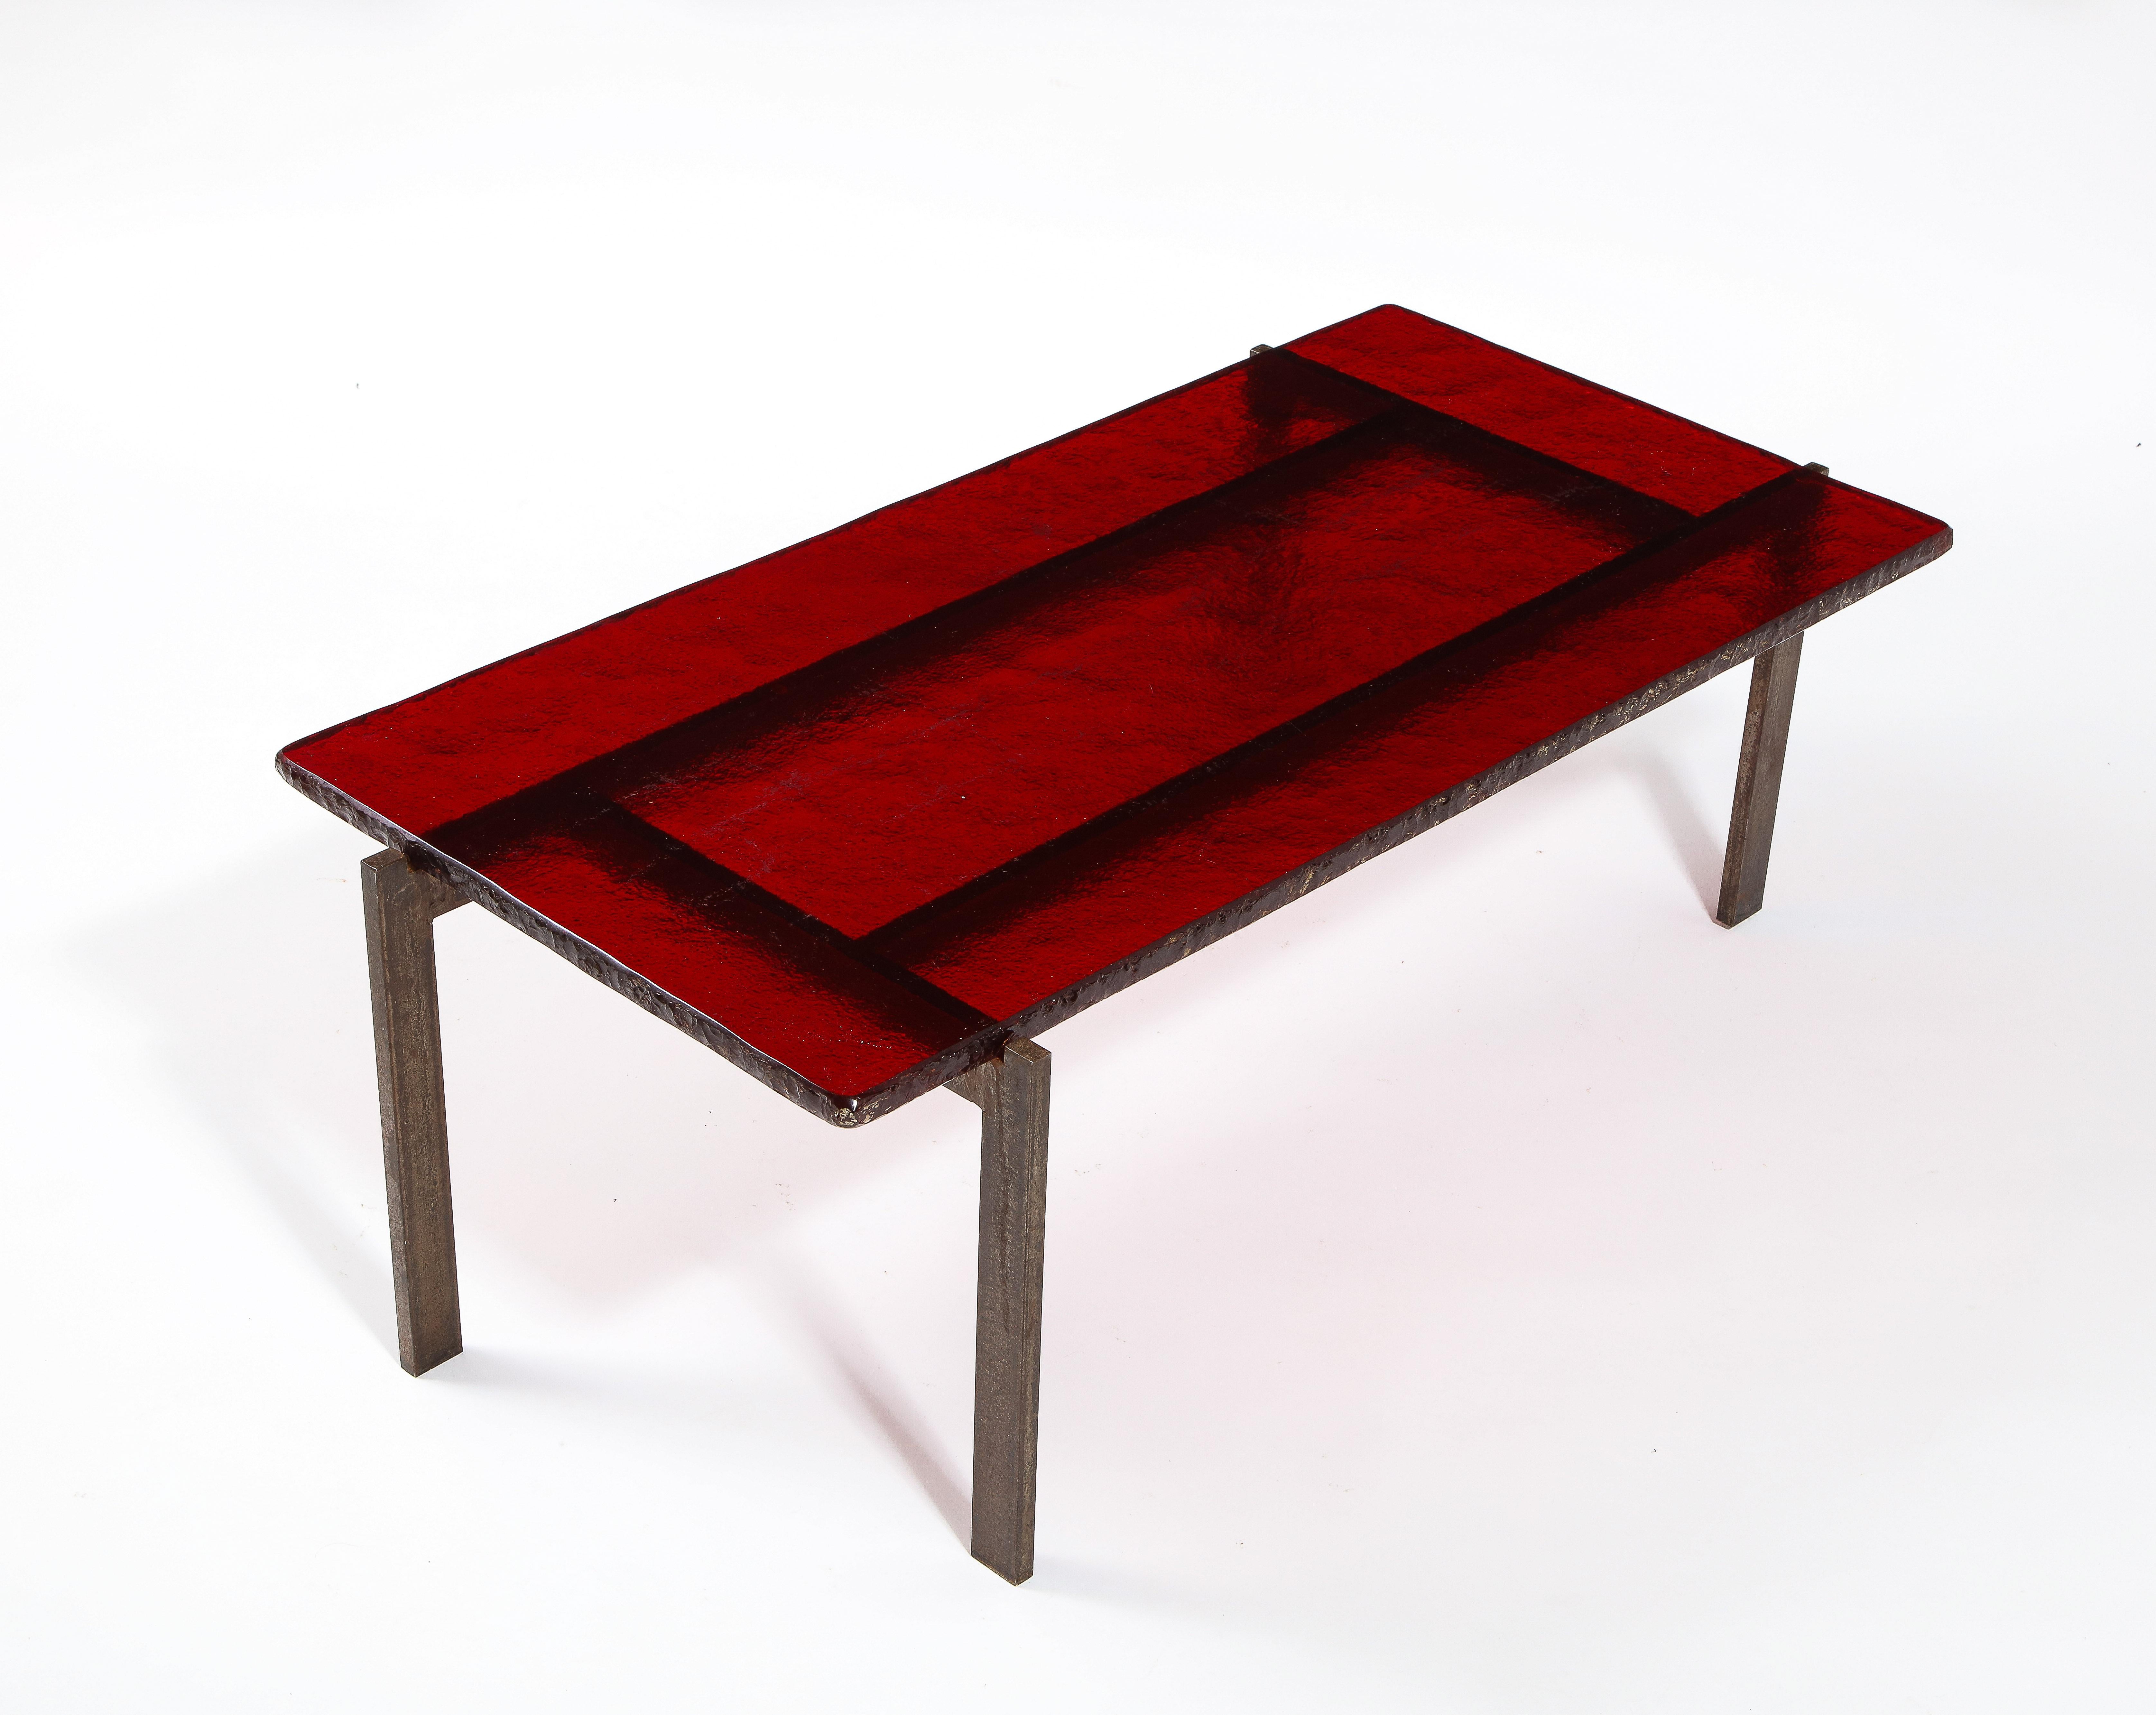 20th Century Ruby Red Saint Gobain Glass & Steel Modernist Coffee Table, France 1960's For Sale